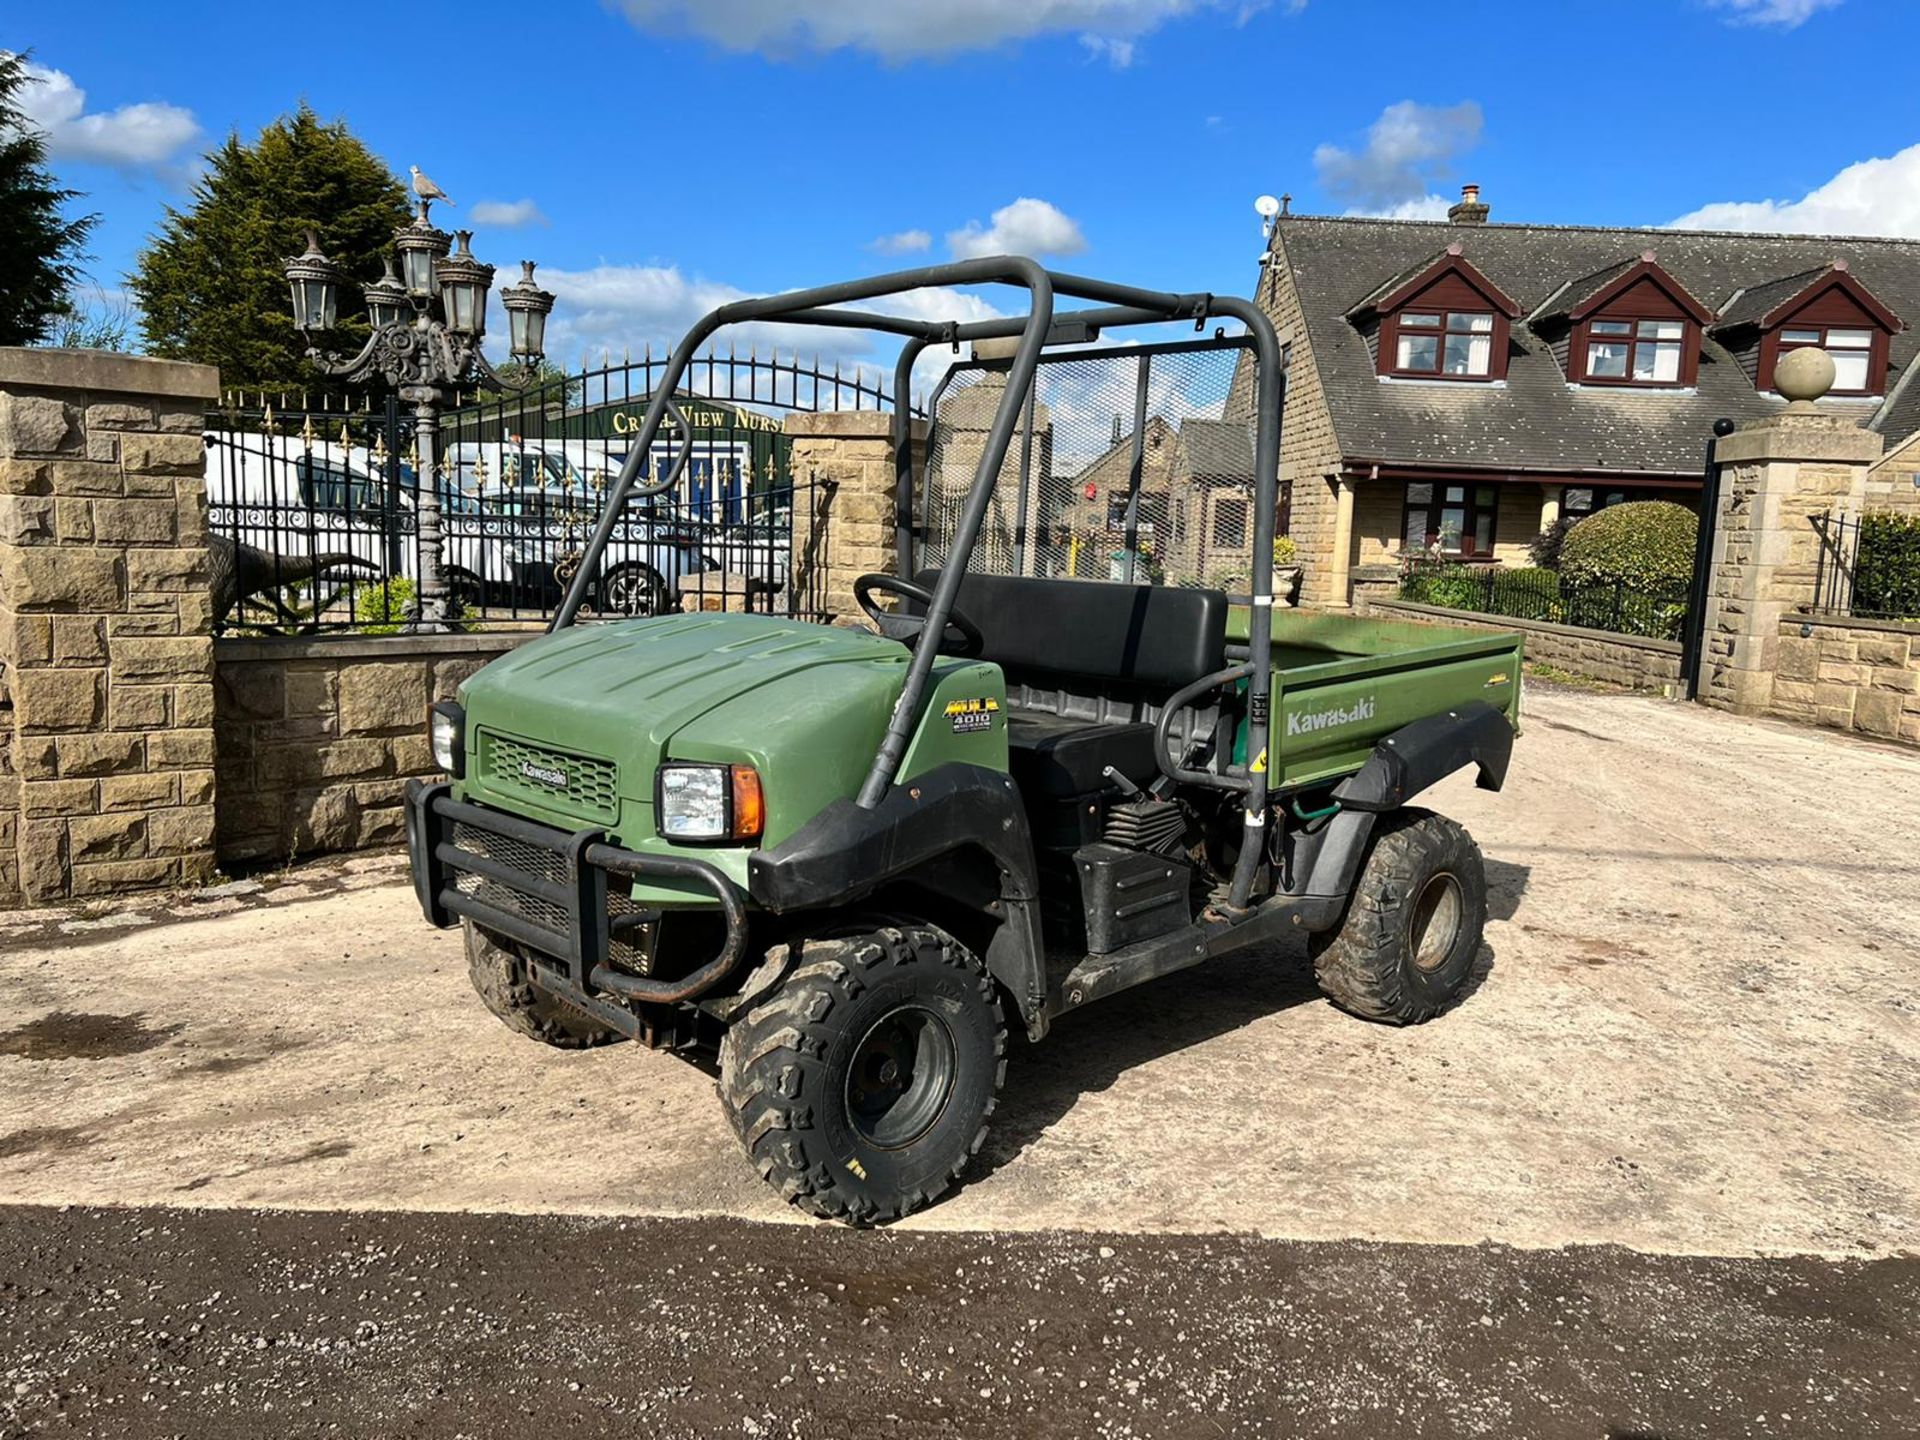 2013 Kawasaki 4010 4WD Mule, Showing A Low 2004 Hours, Manual Tipper Body, runs and drives *PLUS VAT - Image 2 of 13